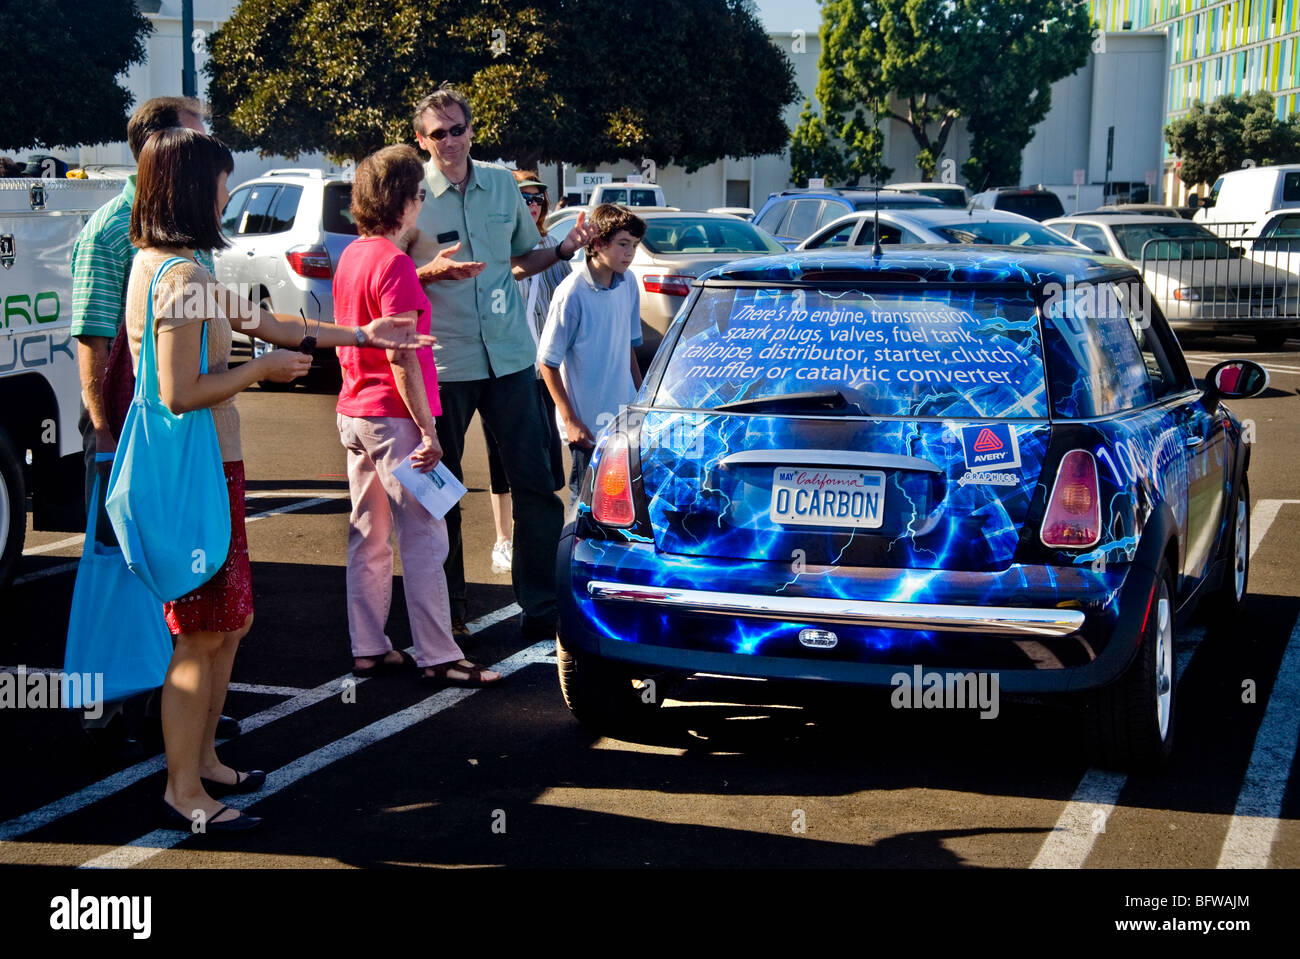 A 'zero carbon'  car is available for visitors' test driving at an 'AltCar' (alternative car) Santa Monica, CA Stock Photo